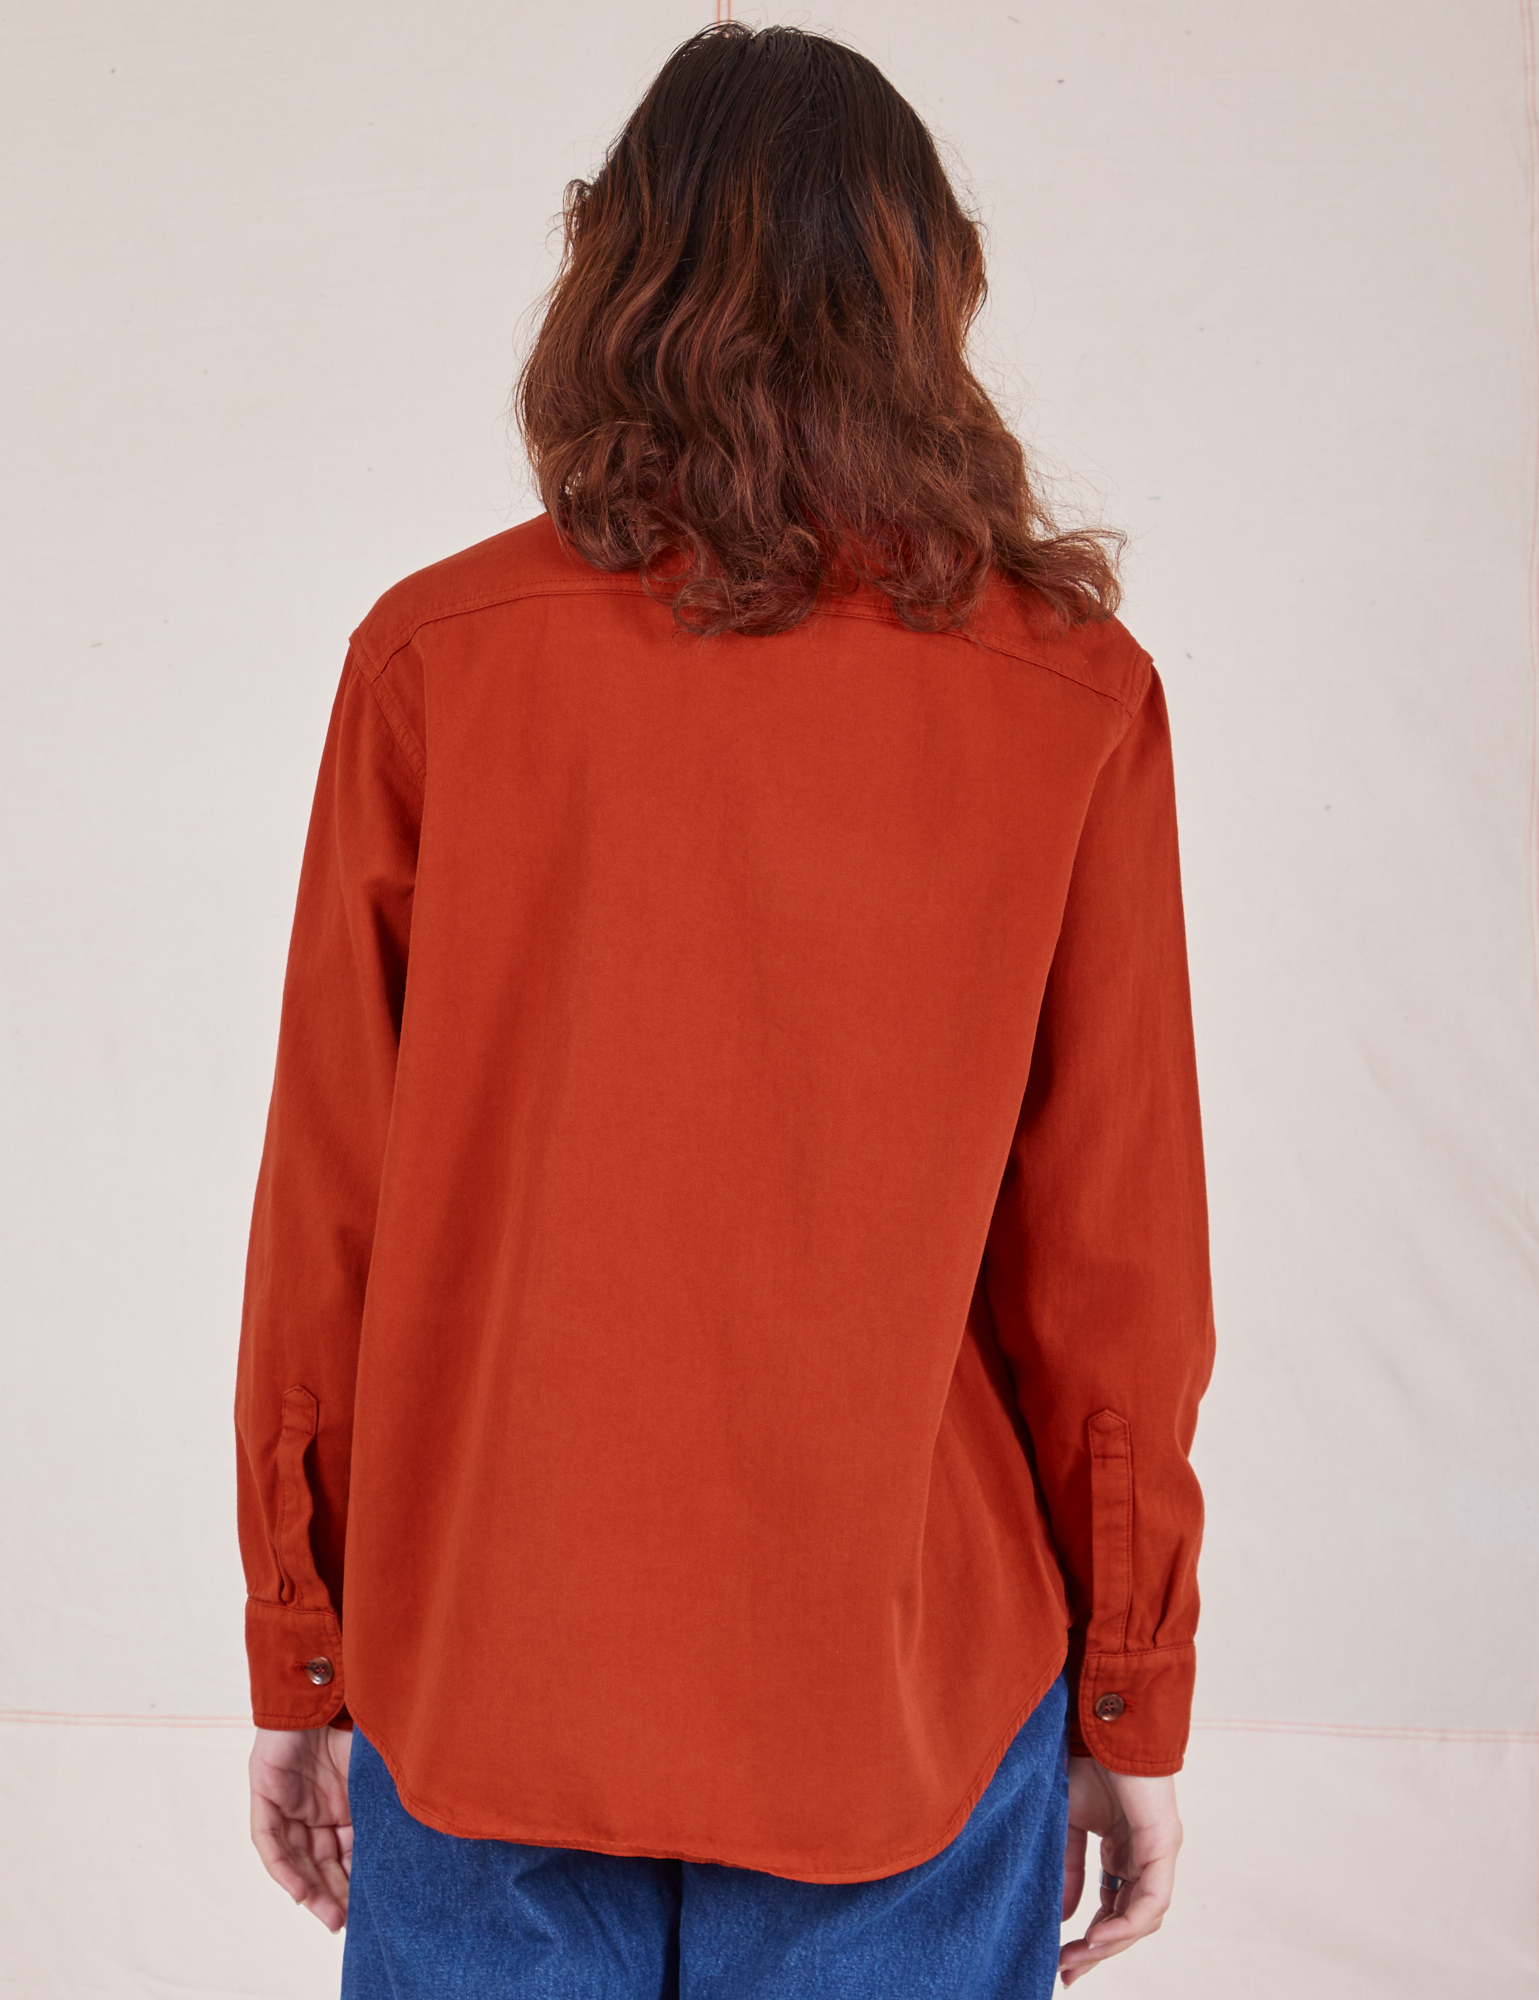 Oversize Overshirt in Paprika back view on Alex